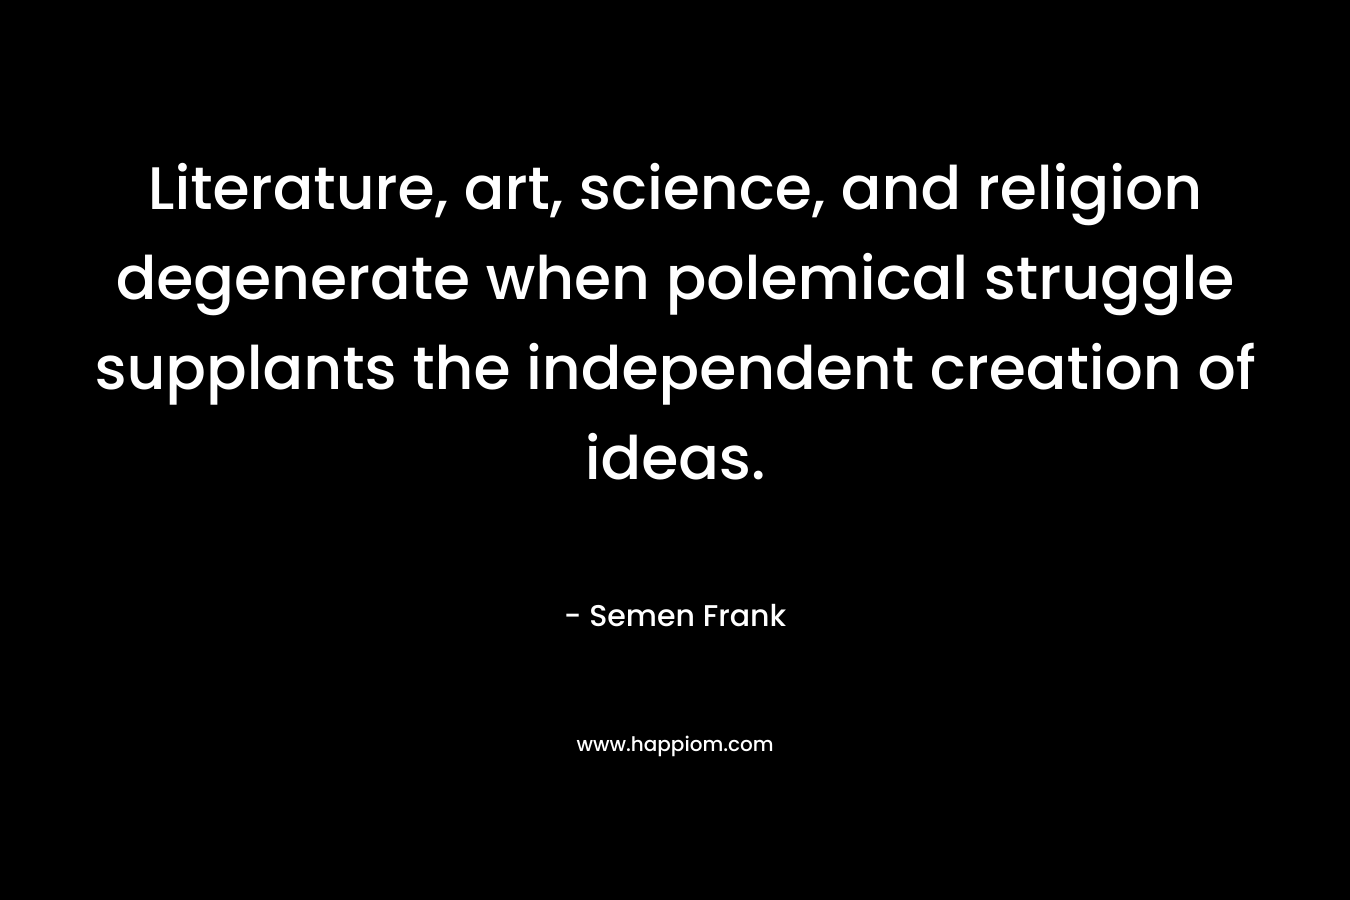 Literature, art, science, and religion degenerate when polemical struggle supplants the independent creation of ideas.